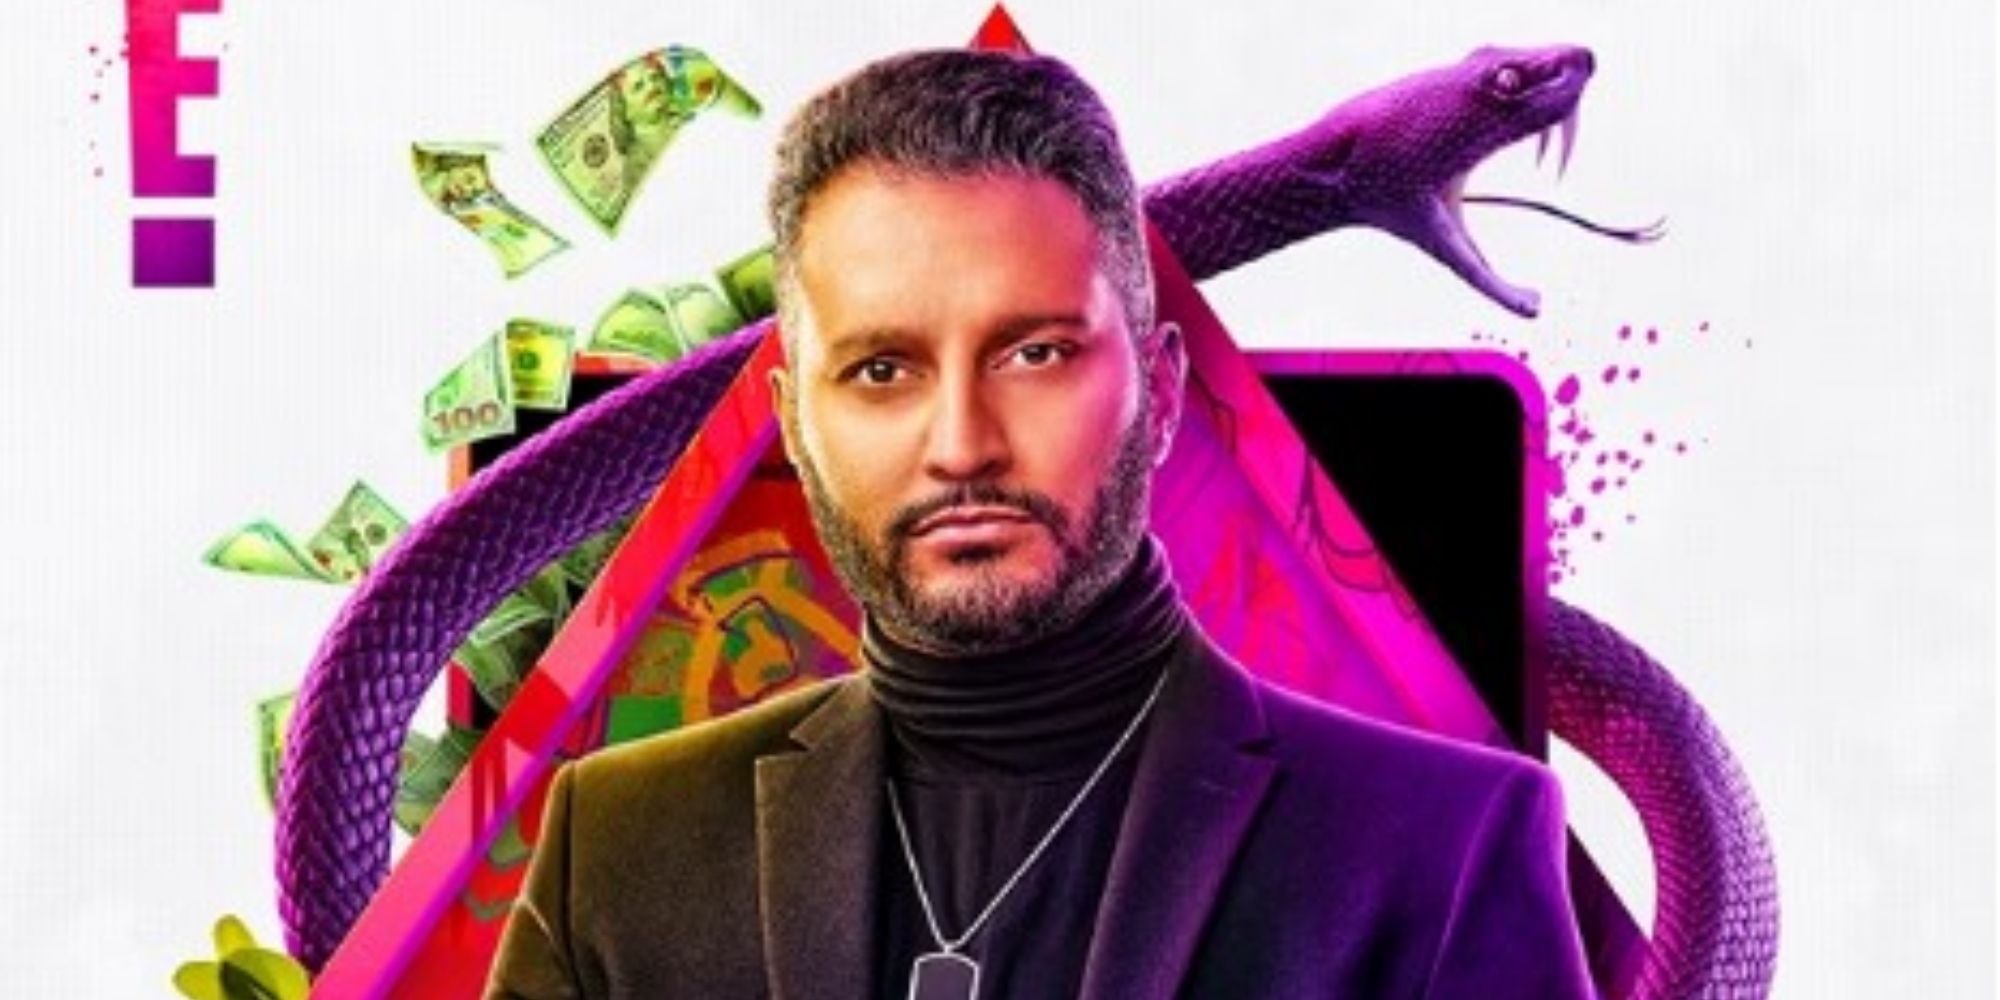 Shake Chatterjee wears a black turtleneck and suit jacket in his 'House of Villains' cast photo.